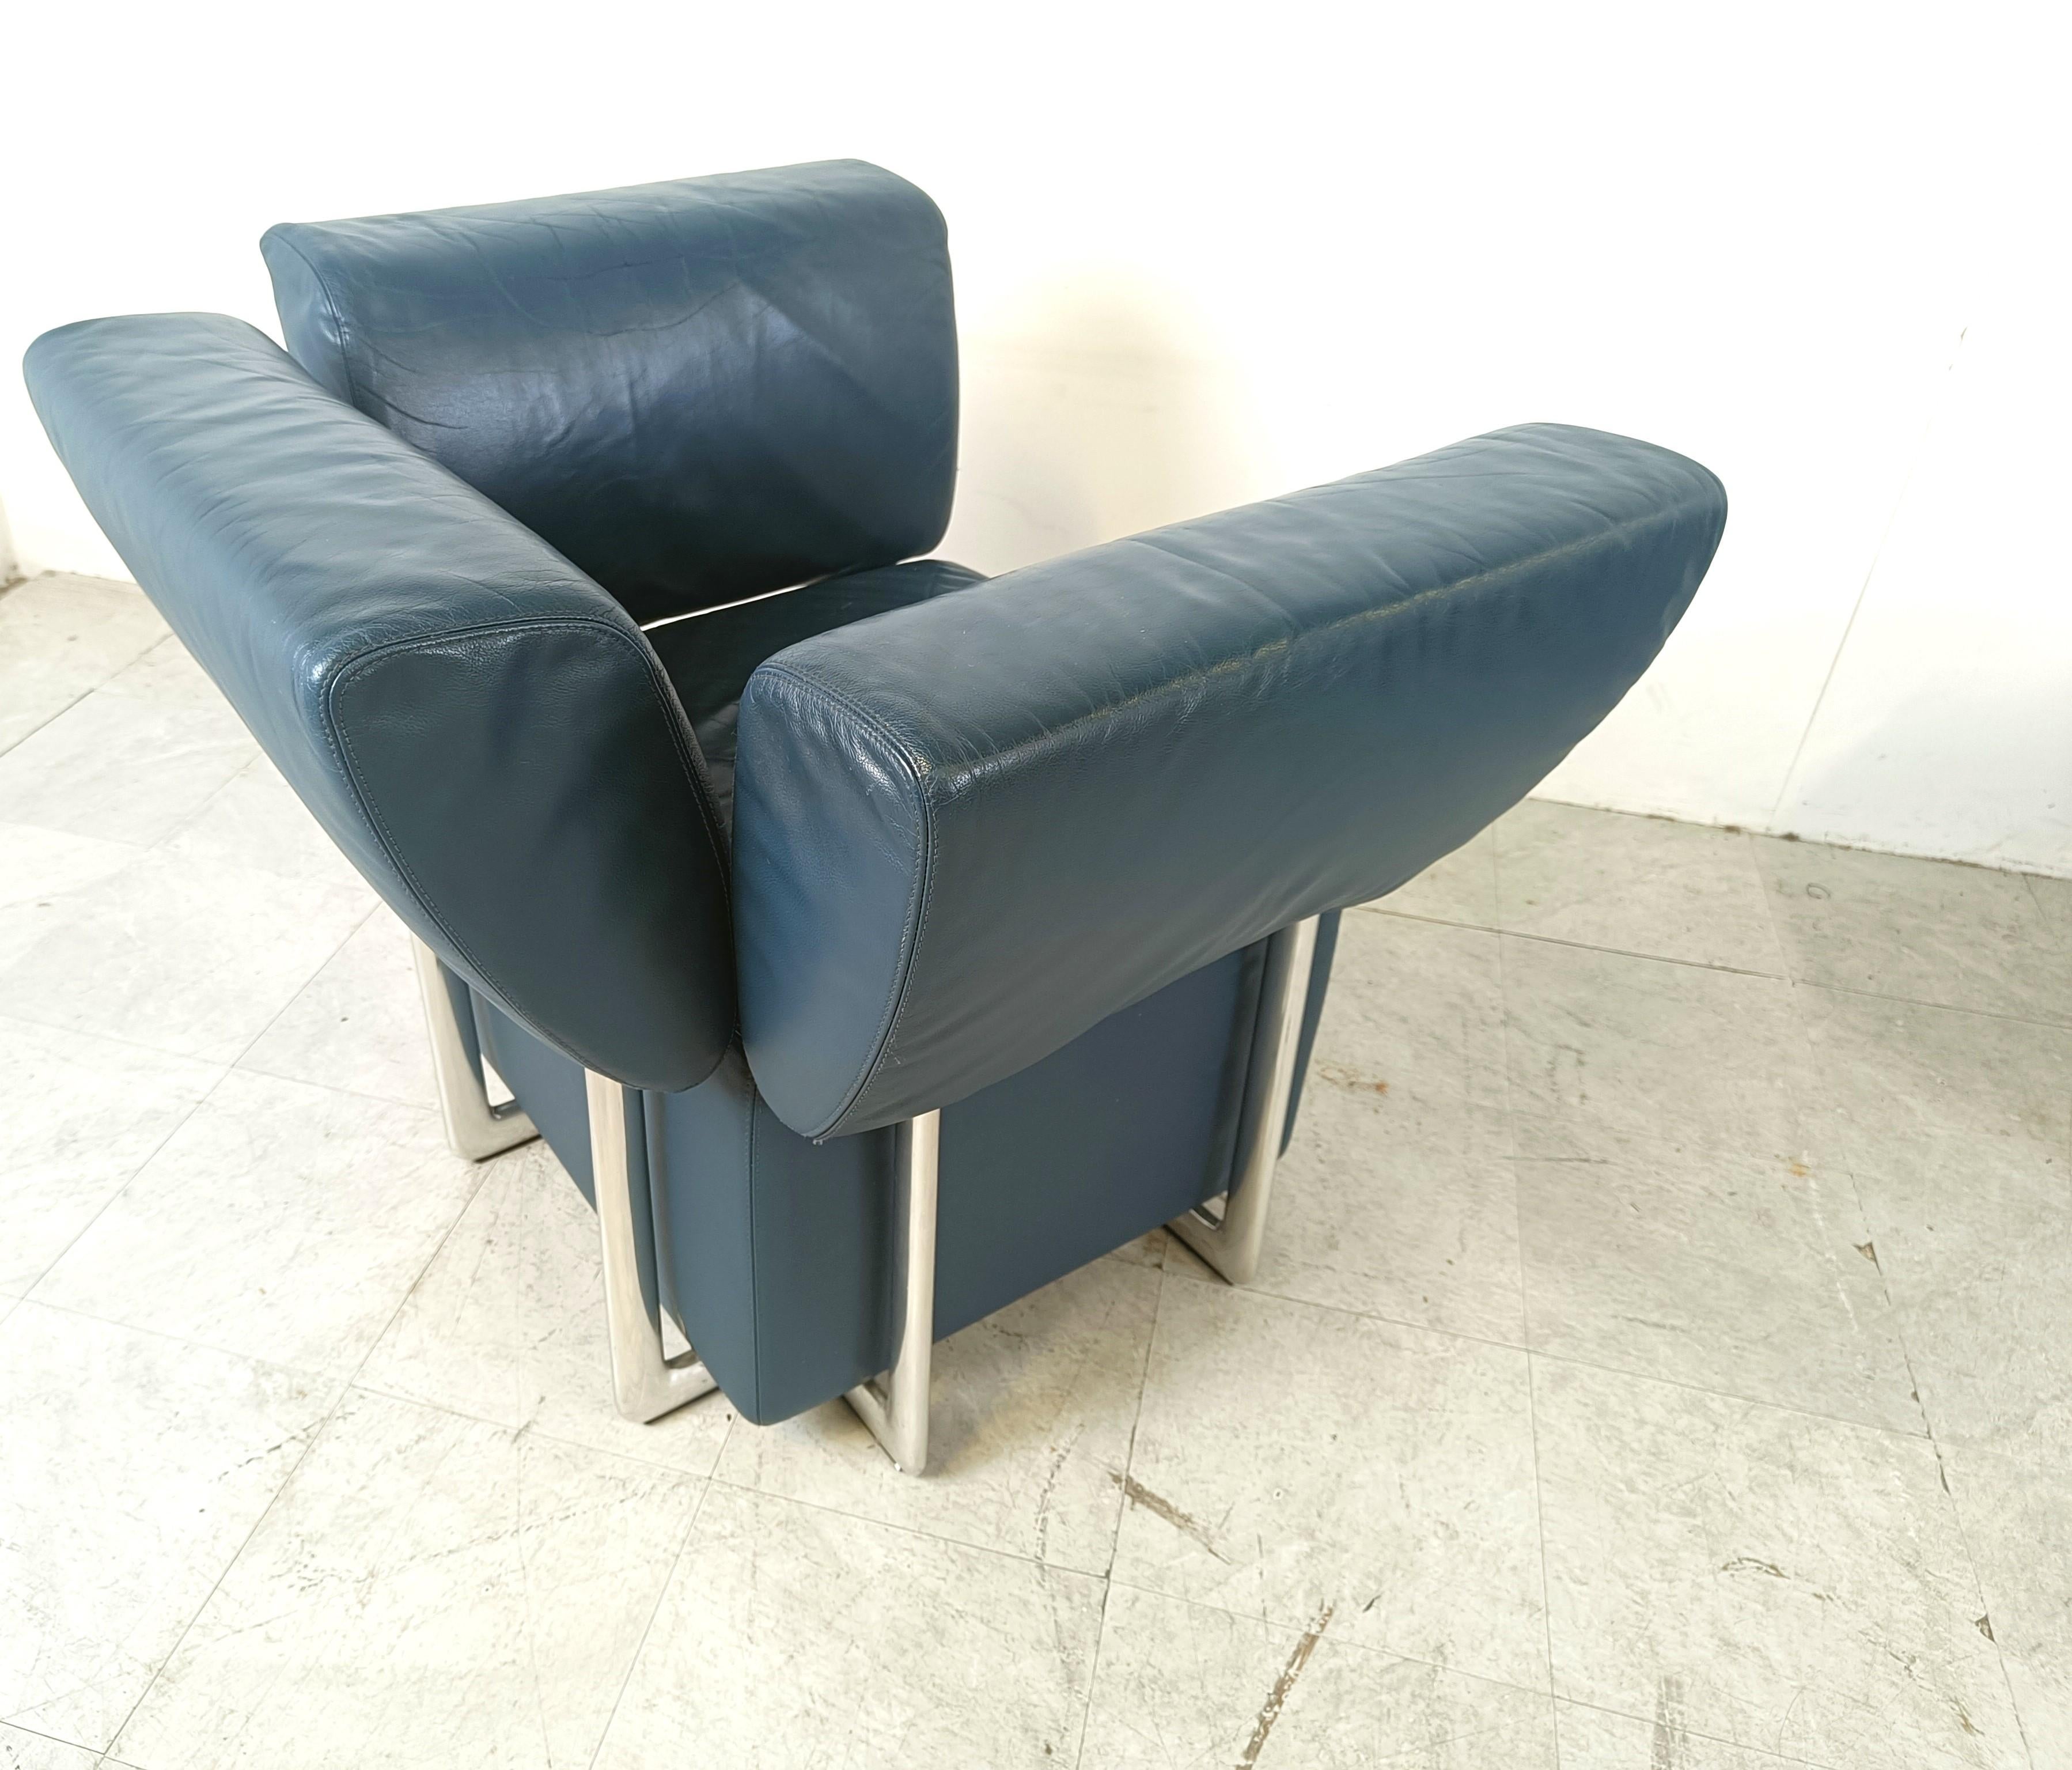 Postmodern Clou sofa by Cor, 1990s For Sale 2